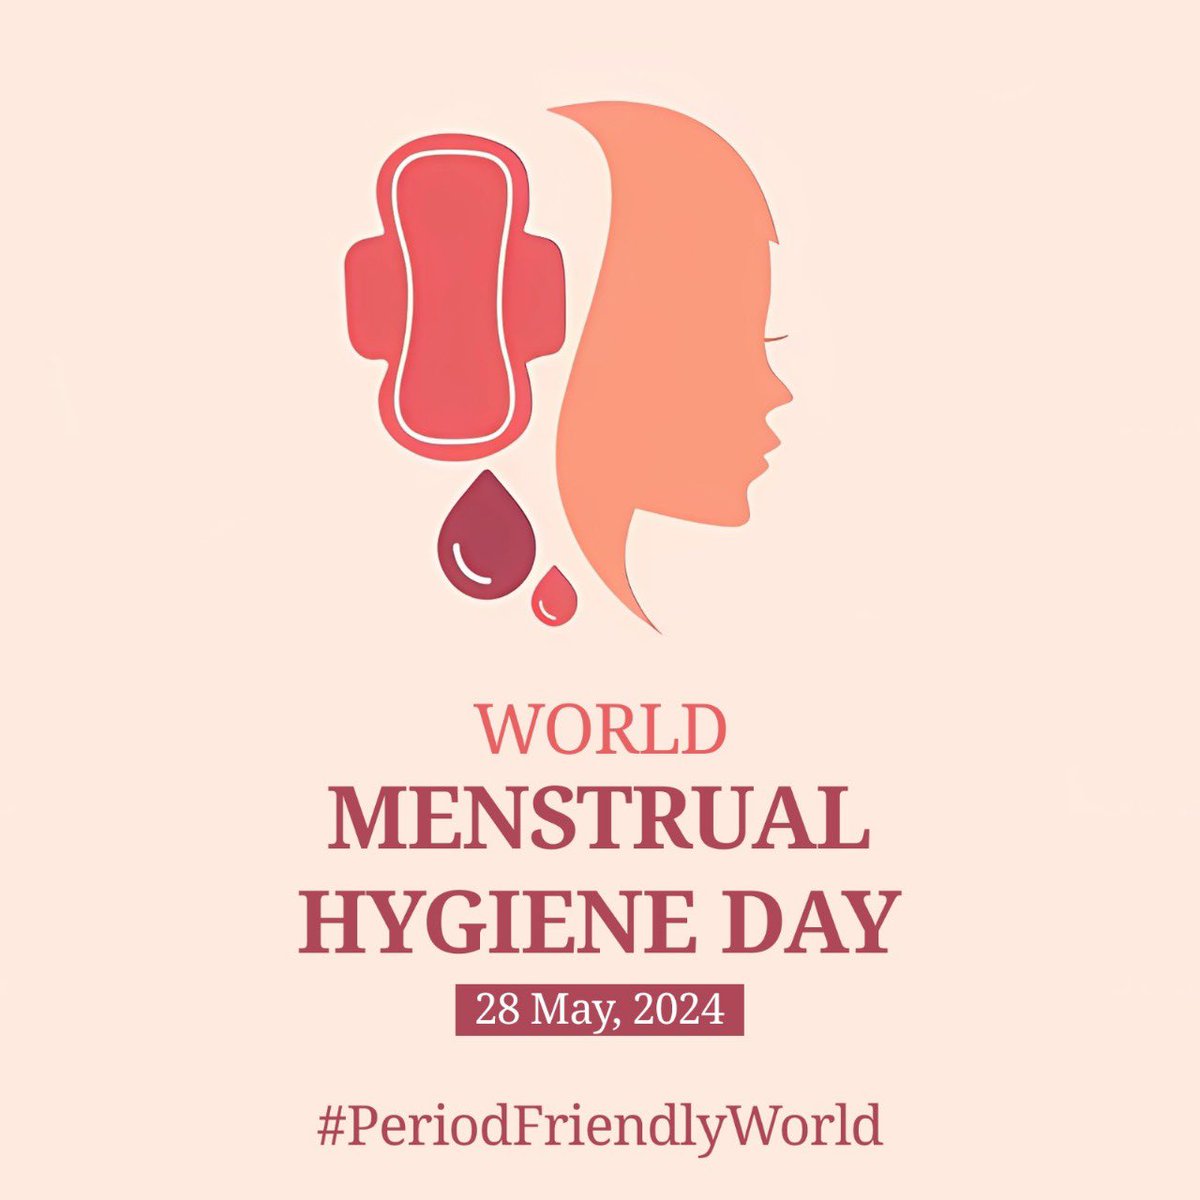 🌍 On #WorldMenstrualHygieneDay, let's break the stigma and promote safe menstrual practices! 🩸
Ensure access to proper hygiene products and education for all.

 #MenstrualHygiene #SafeDisposal #PeriodFriendlyWorld